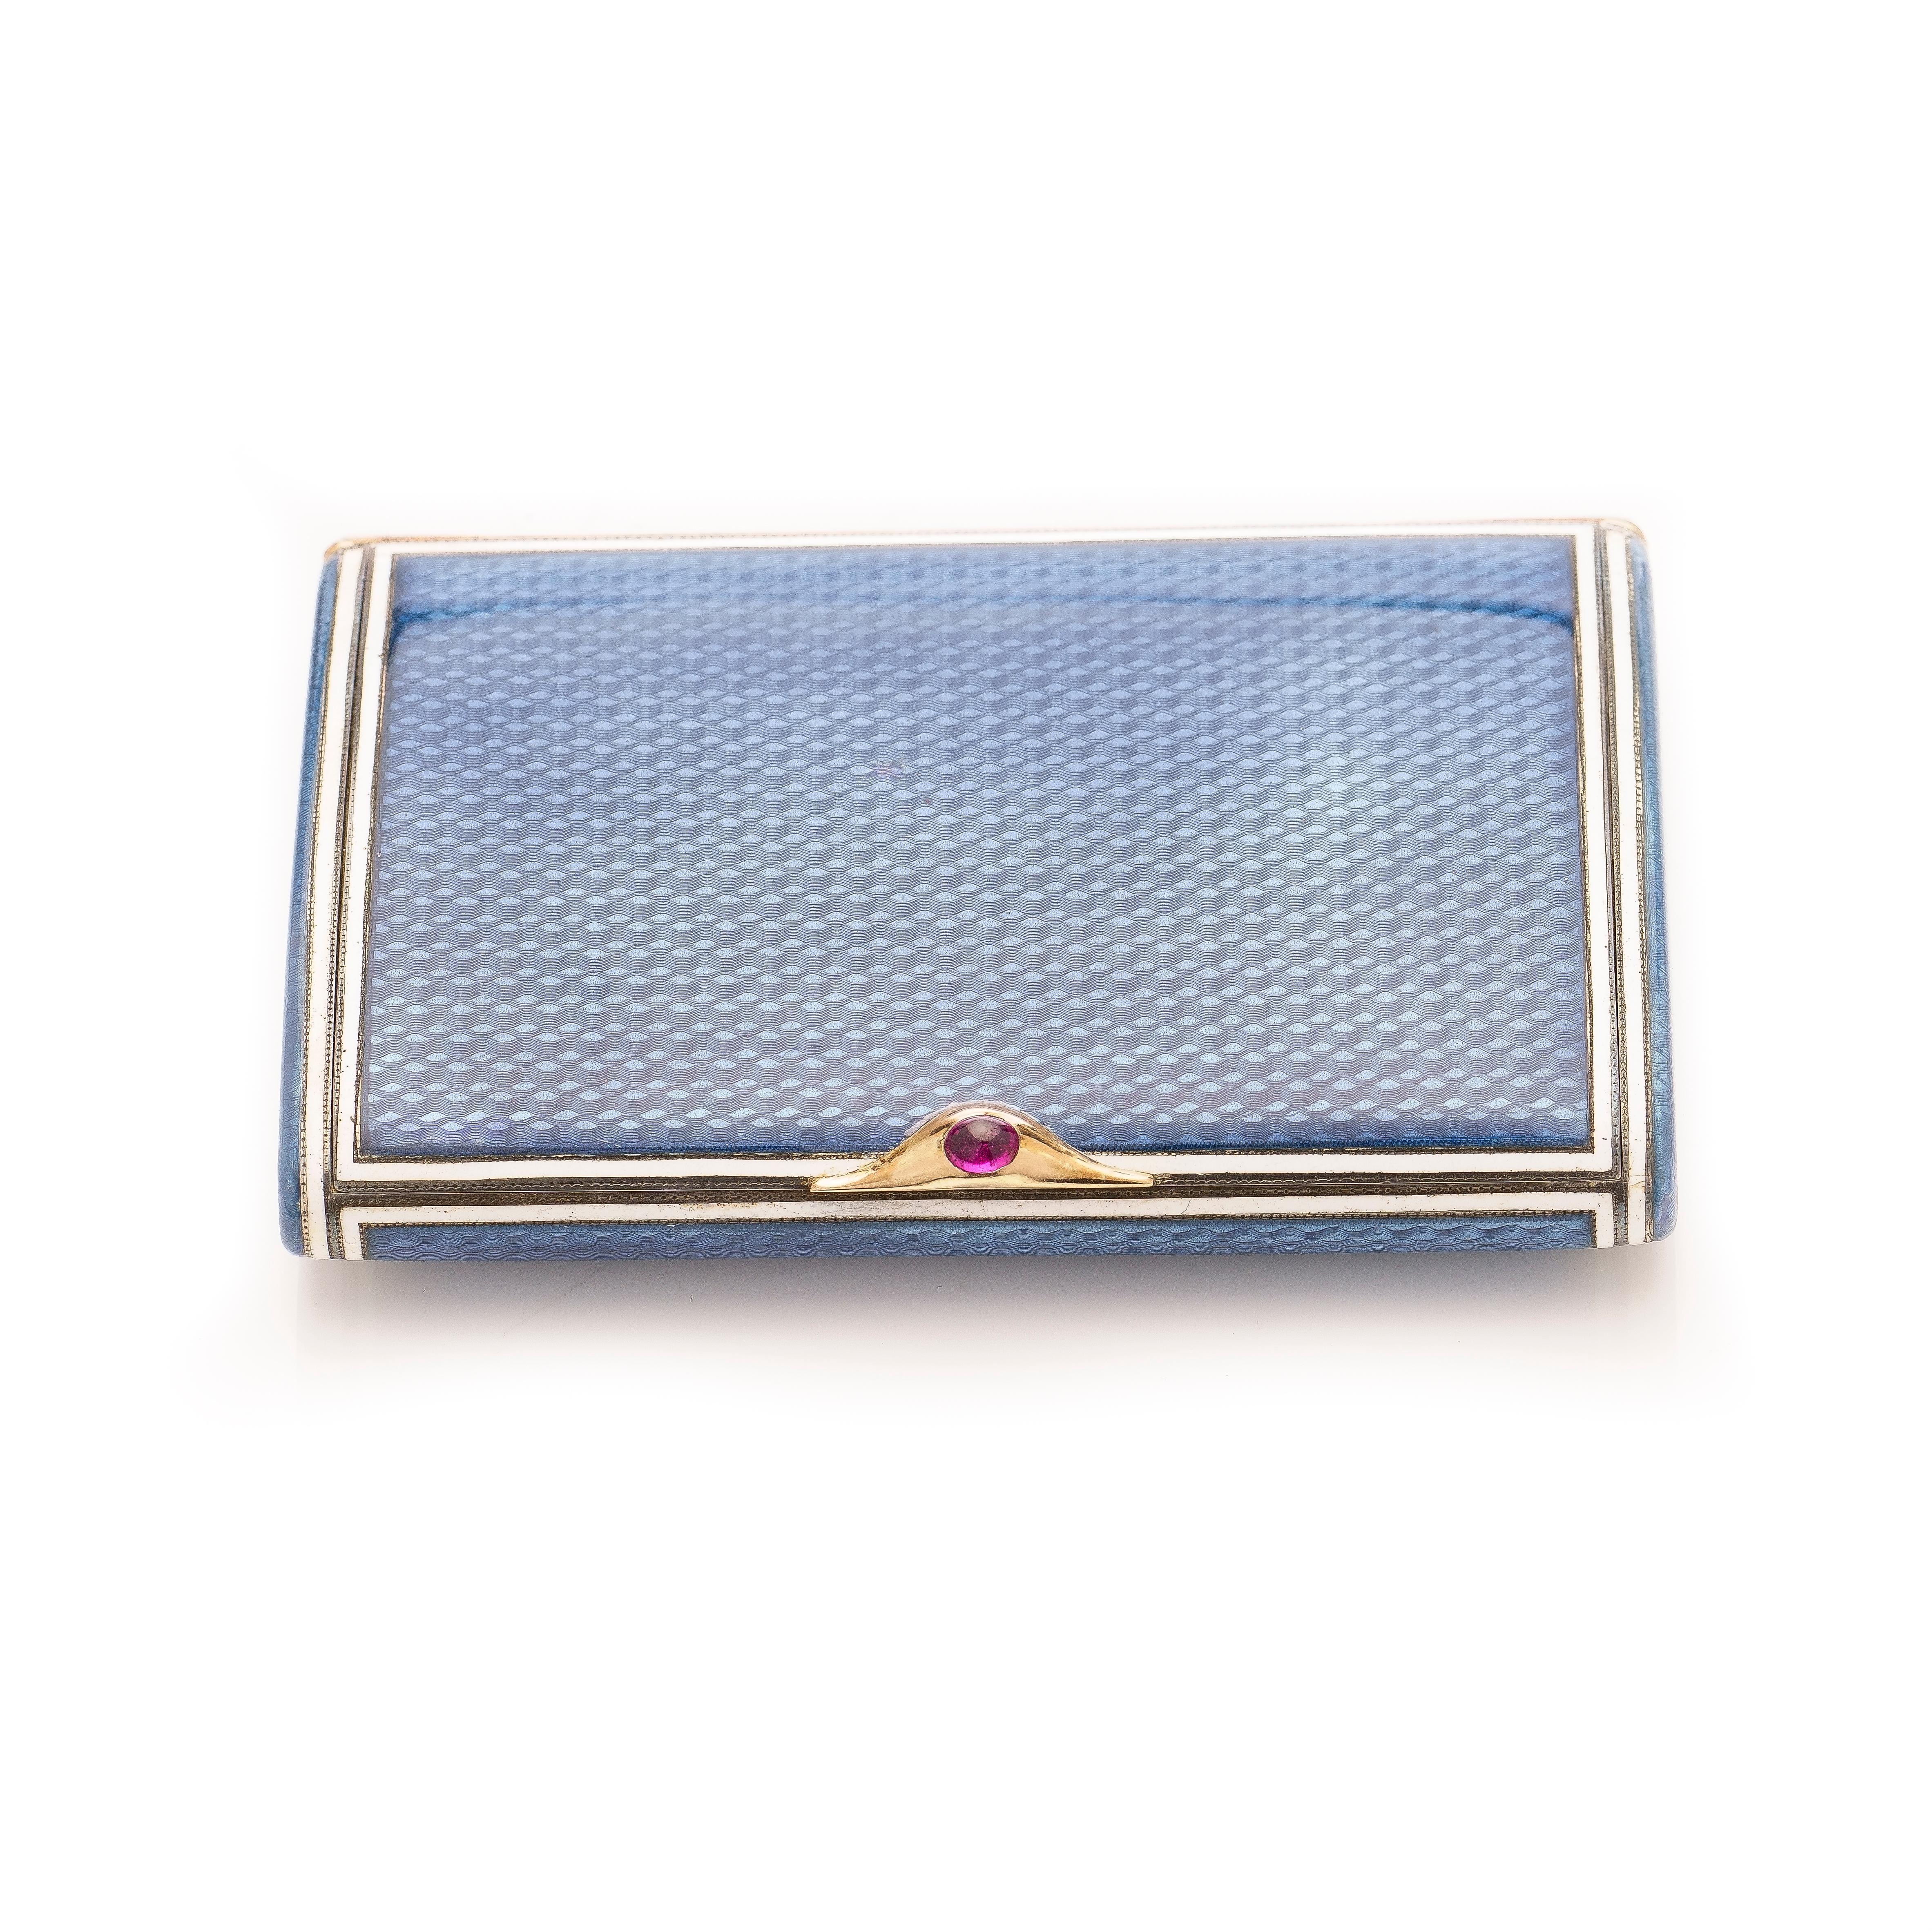 Russian silver and guilloché enamel cigarette case, Ivan Britsyn, St. Petersburg, 1908-1917. 

Rectangular, of oval section, with sapphire purple translucent enamel over a wavy guilloché ground and with sapphire cabochon thumbpiece, marked